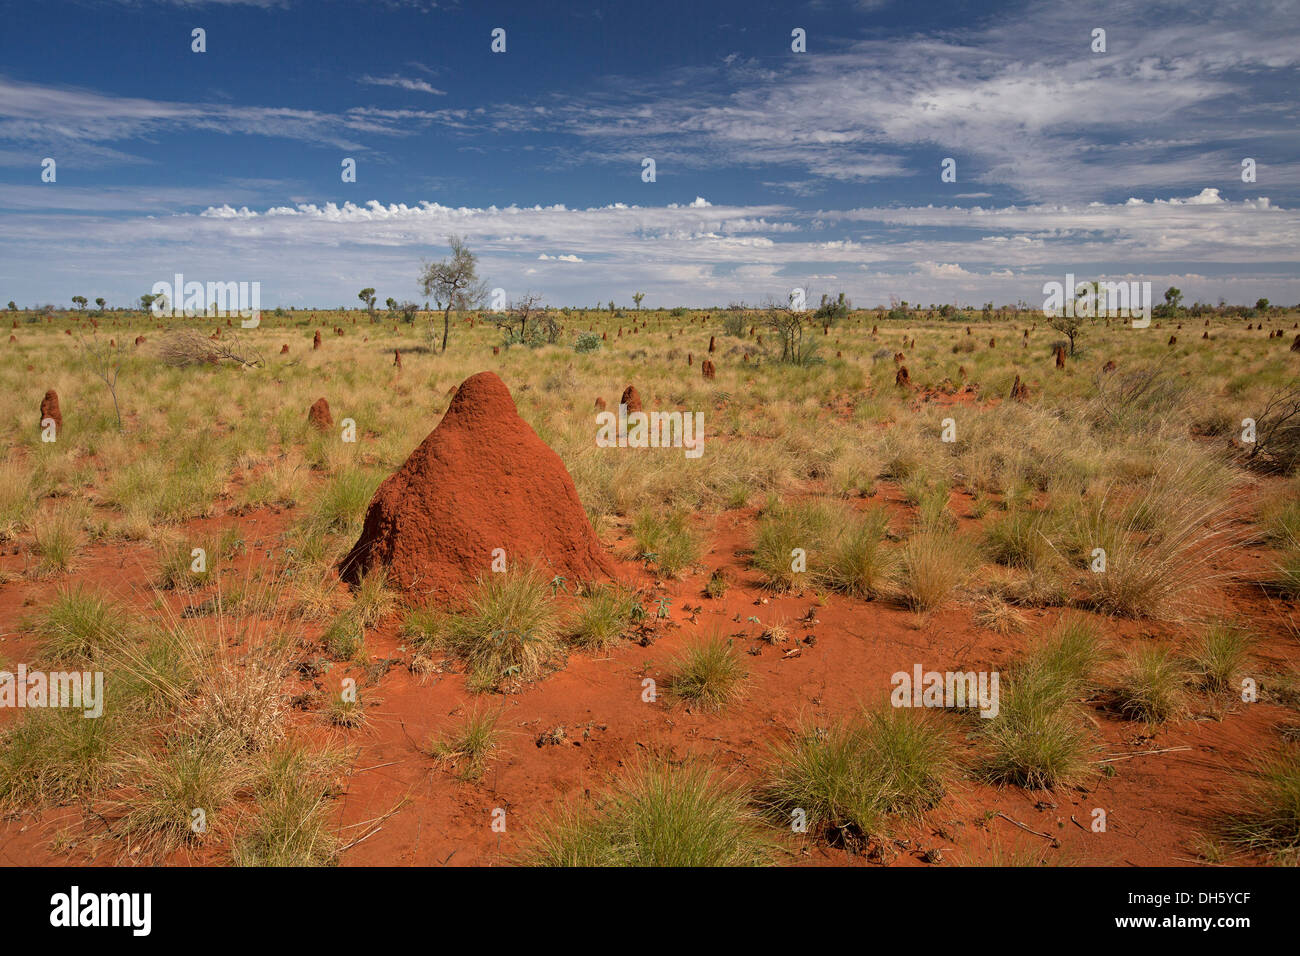 Colourful Australian outback landscape with red termite mounds and tufts of grass on plains stretching to horizon and blue sky Stock Photo